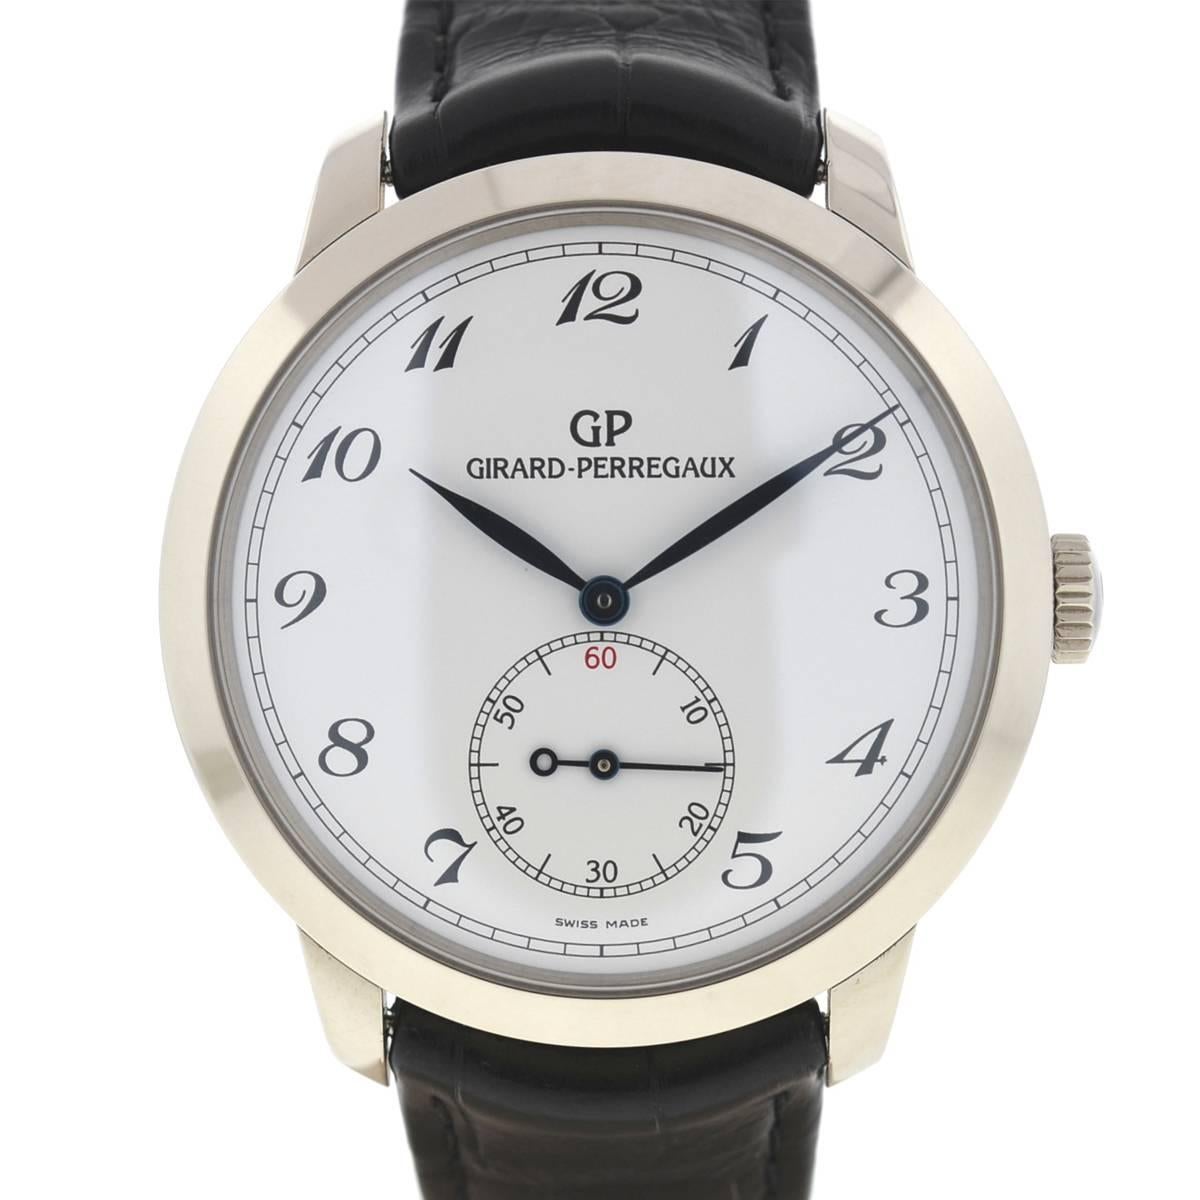 Company - GIRARD PERREGAUX
Model - GP 1966
Case Metal - 18k White Gold
Case Measurement - 40mm
Bracelet - Leather Strap
Dial - White
Bezel - 18k White Gold
Crystal - Scratch Resistant Sapphire
Movement - Automatic
Features - Hours, Minutes, and